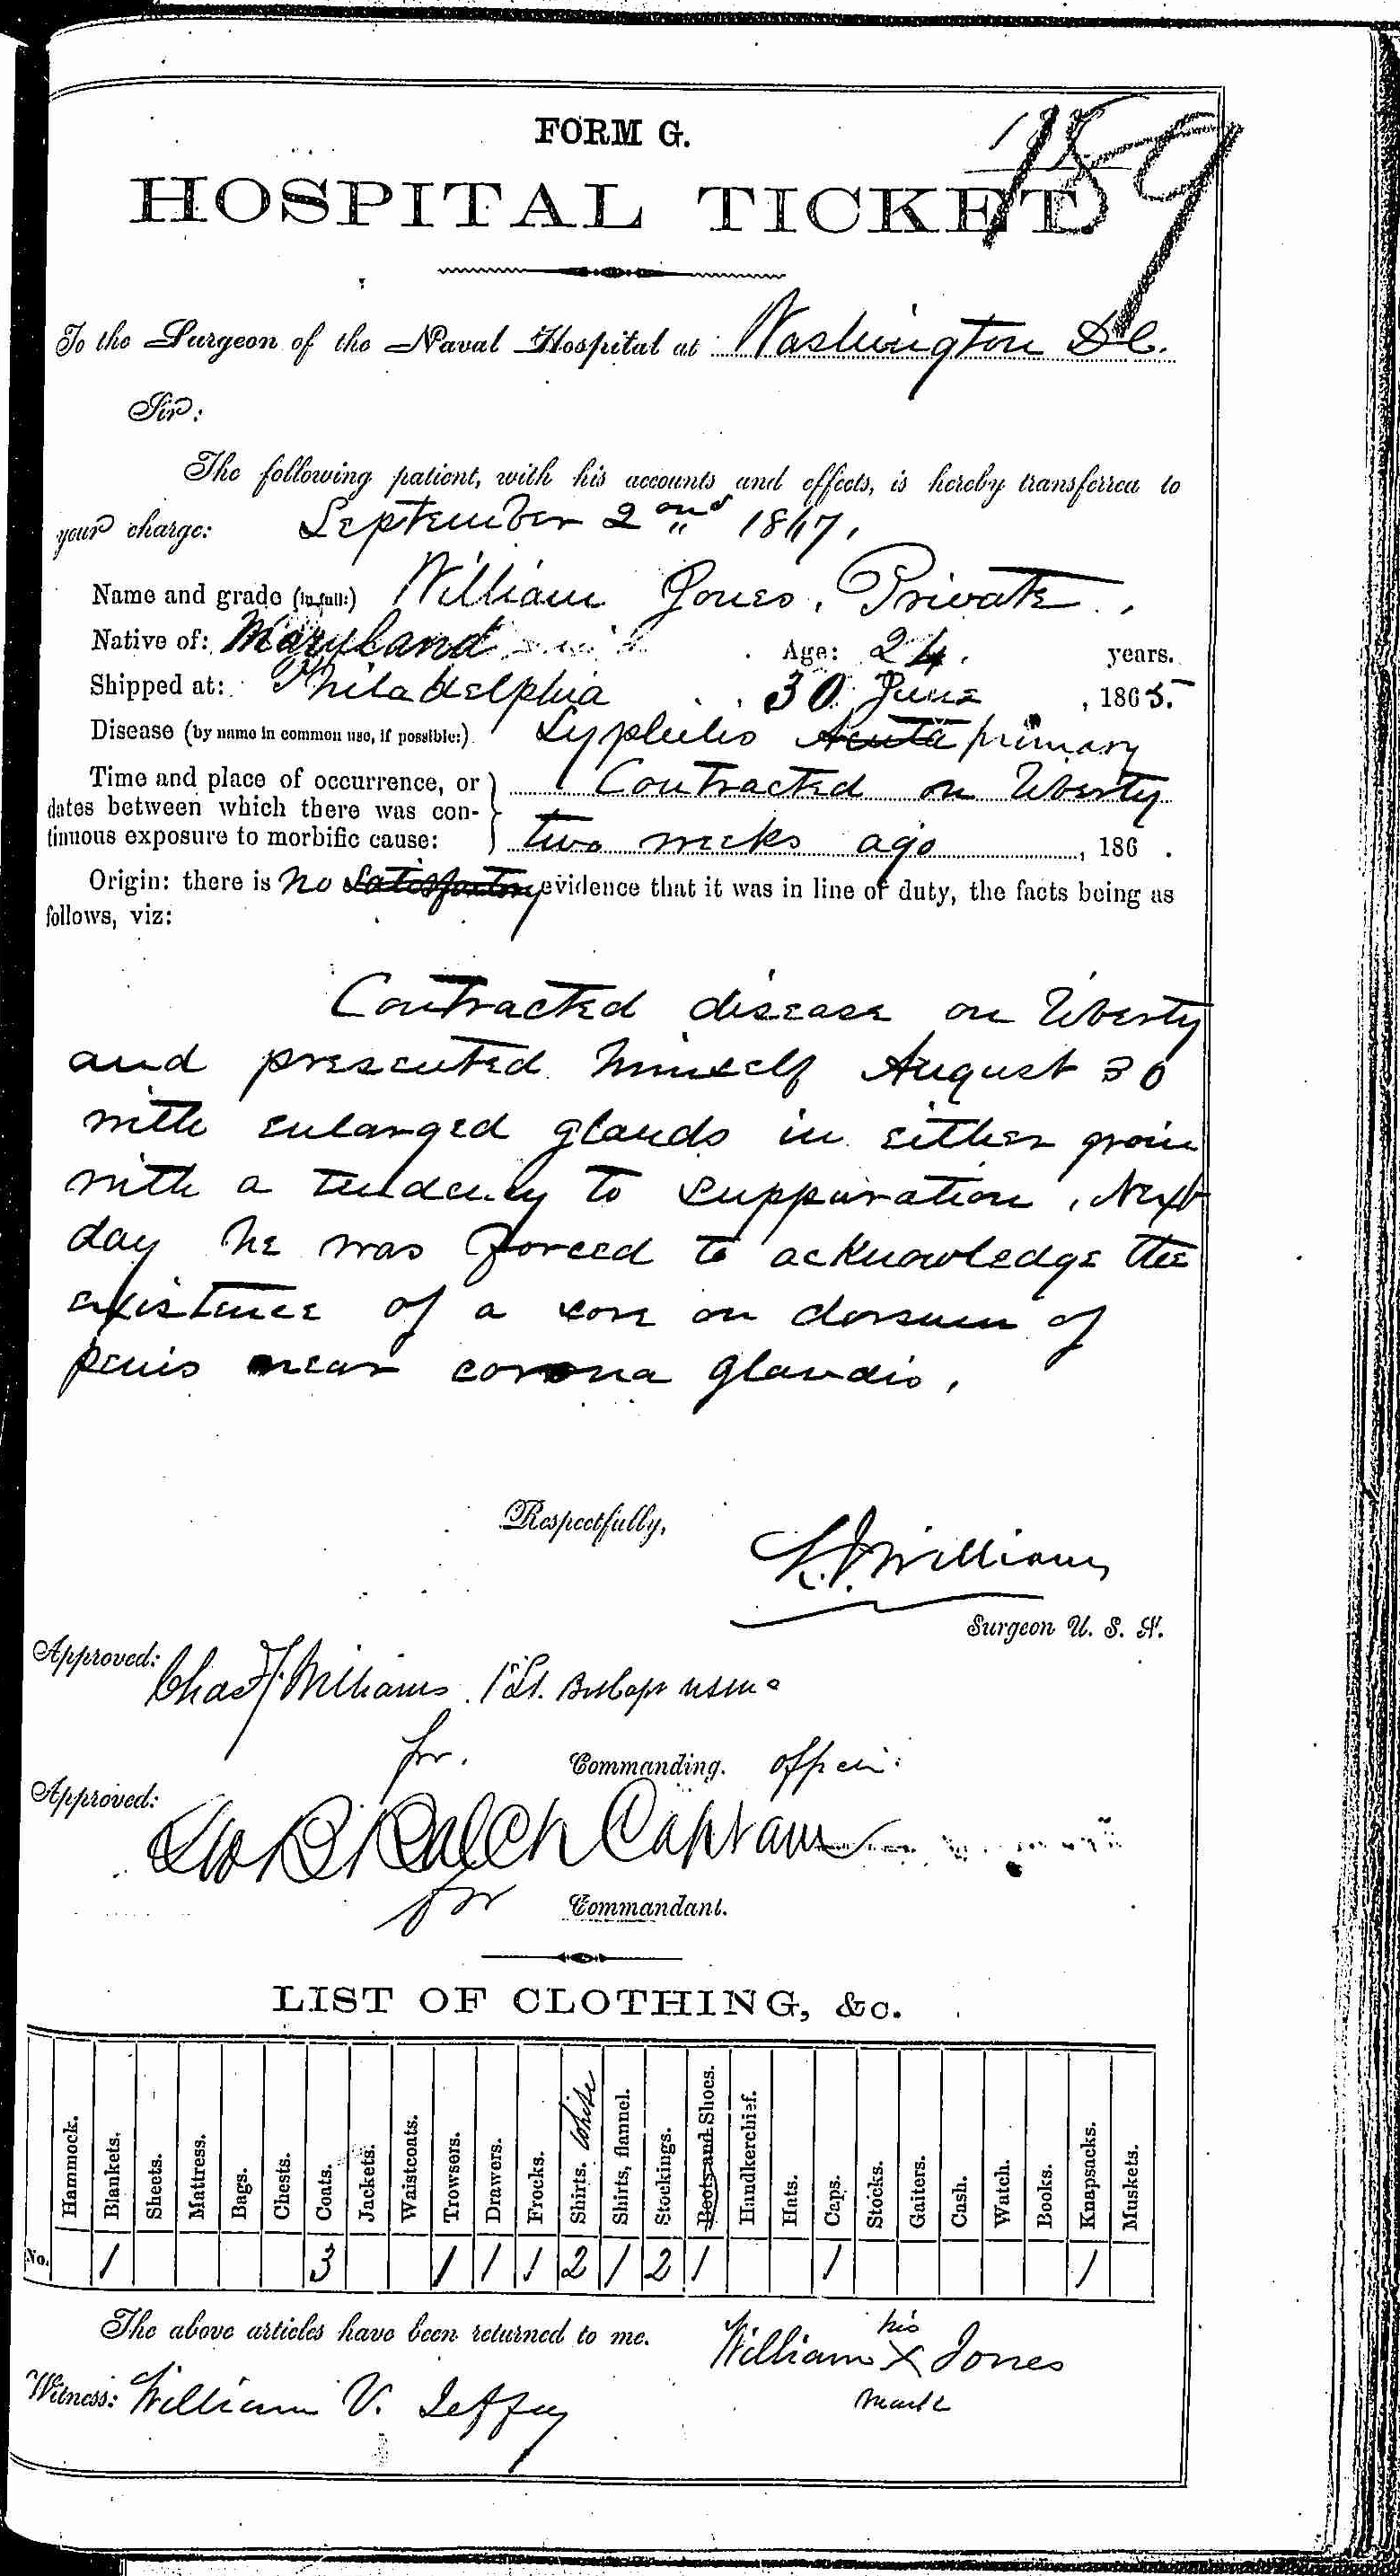 Entry for William Jones (first admission page 1 of 2) in the log Hospital Tickets and Case Papers - Naval Hospital - Washington, D.C. - 1866-68